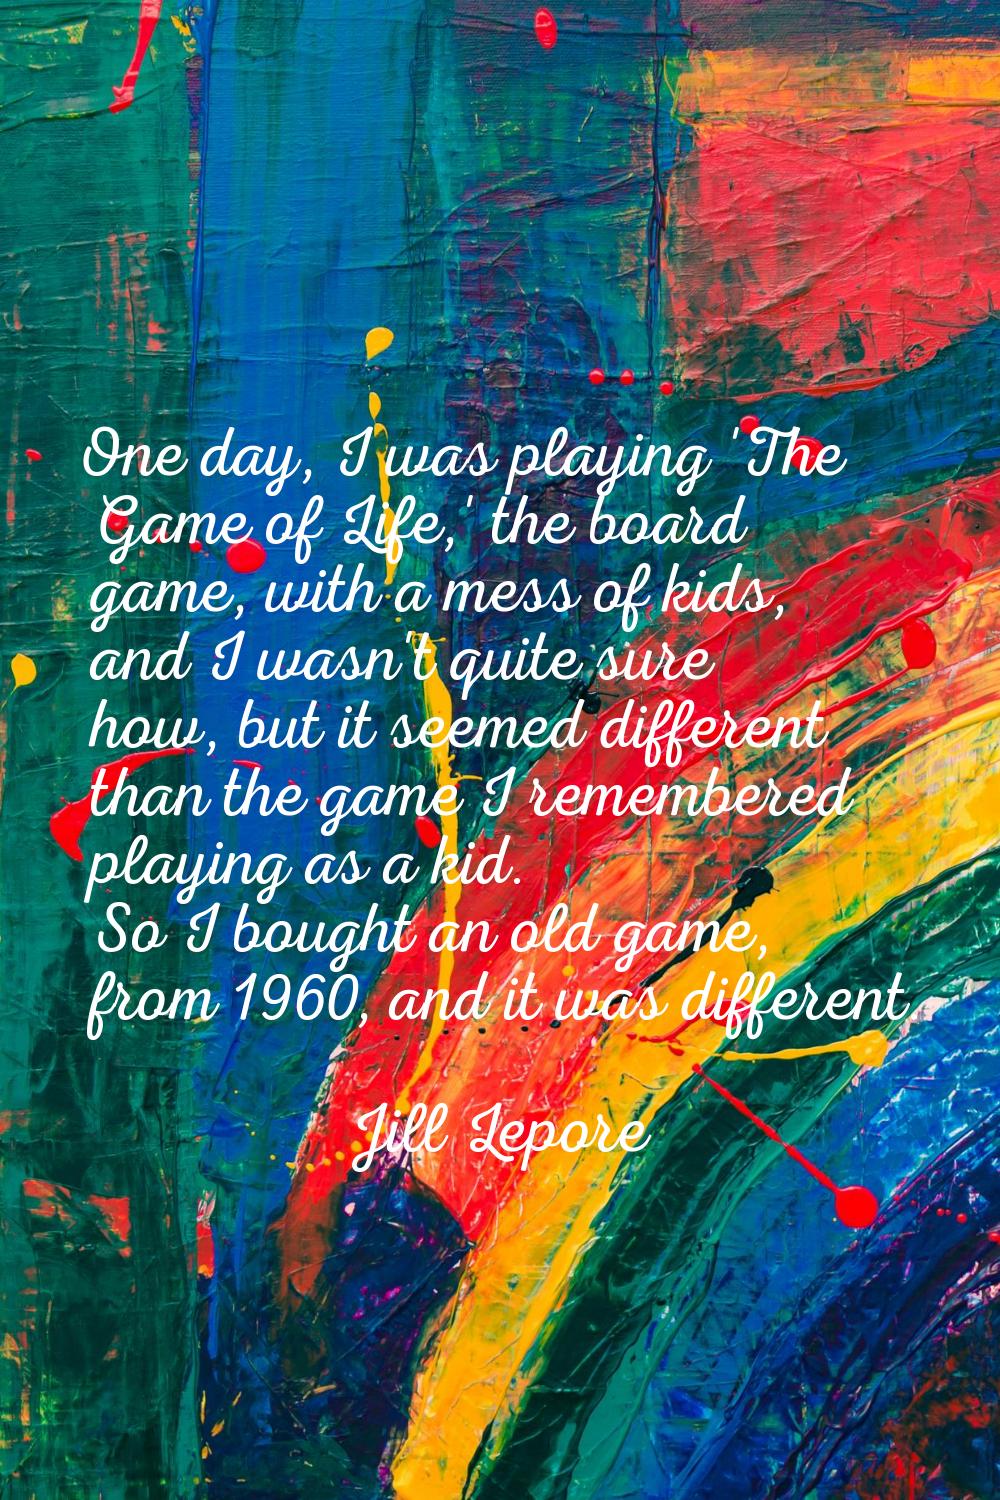 One day, I was playing 'The Game of Life,' the board game, with a mess of kids, and I wasn't quite 